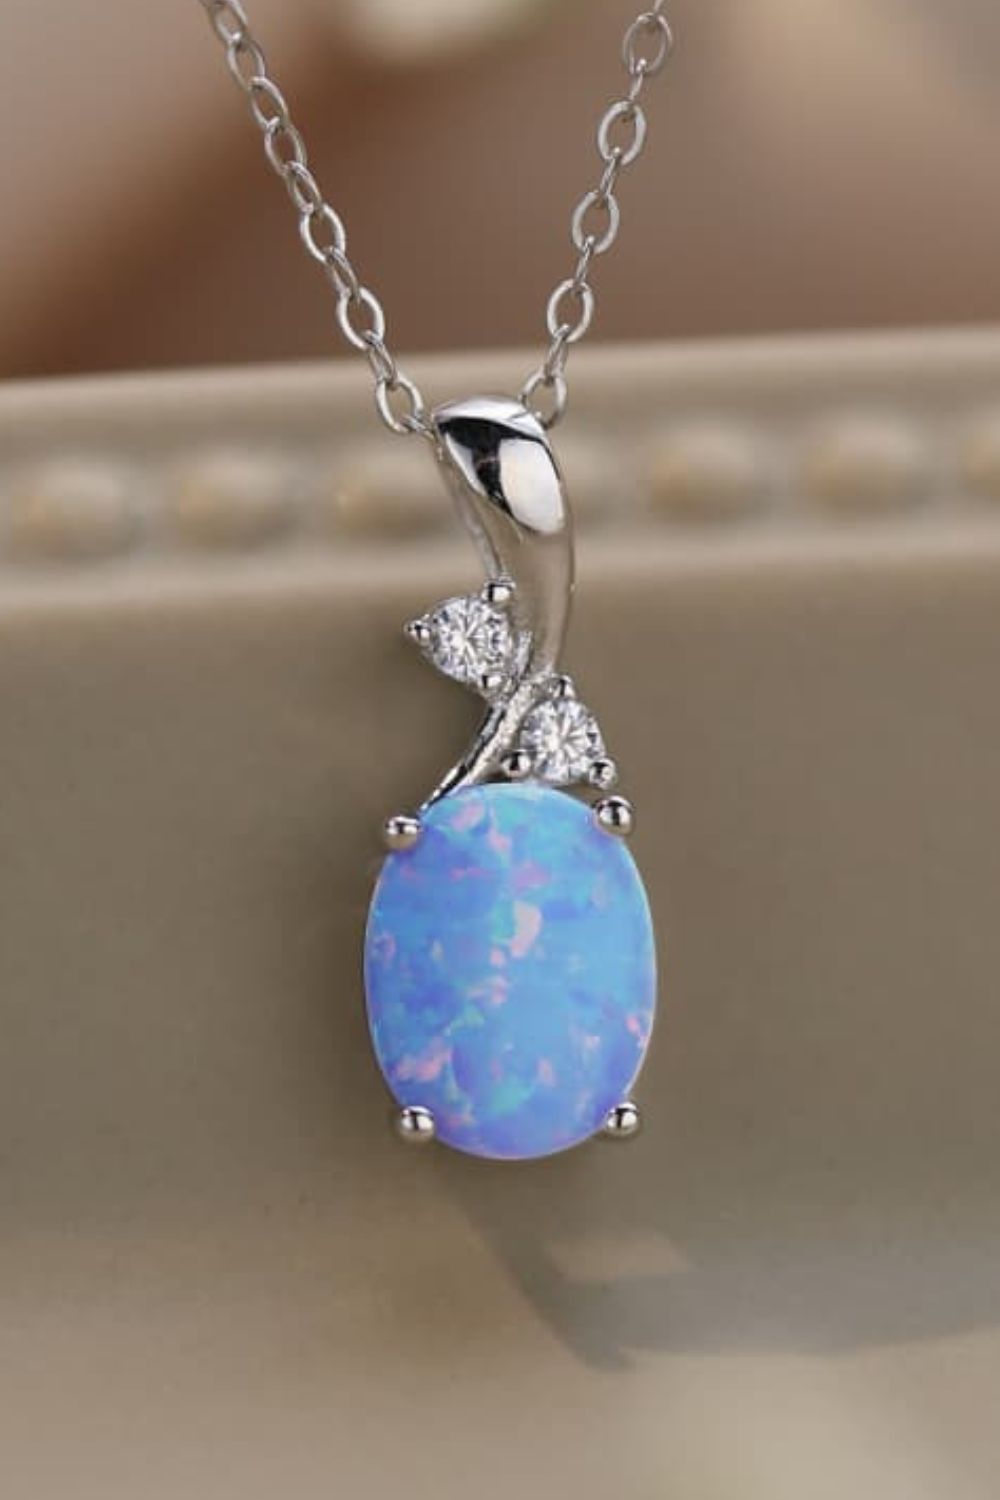 Dim Gray Opal Oval Pendant Chain Necklace